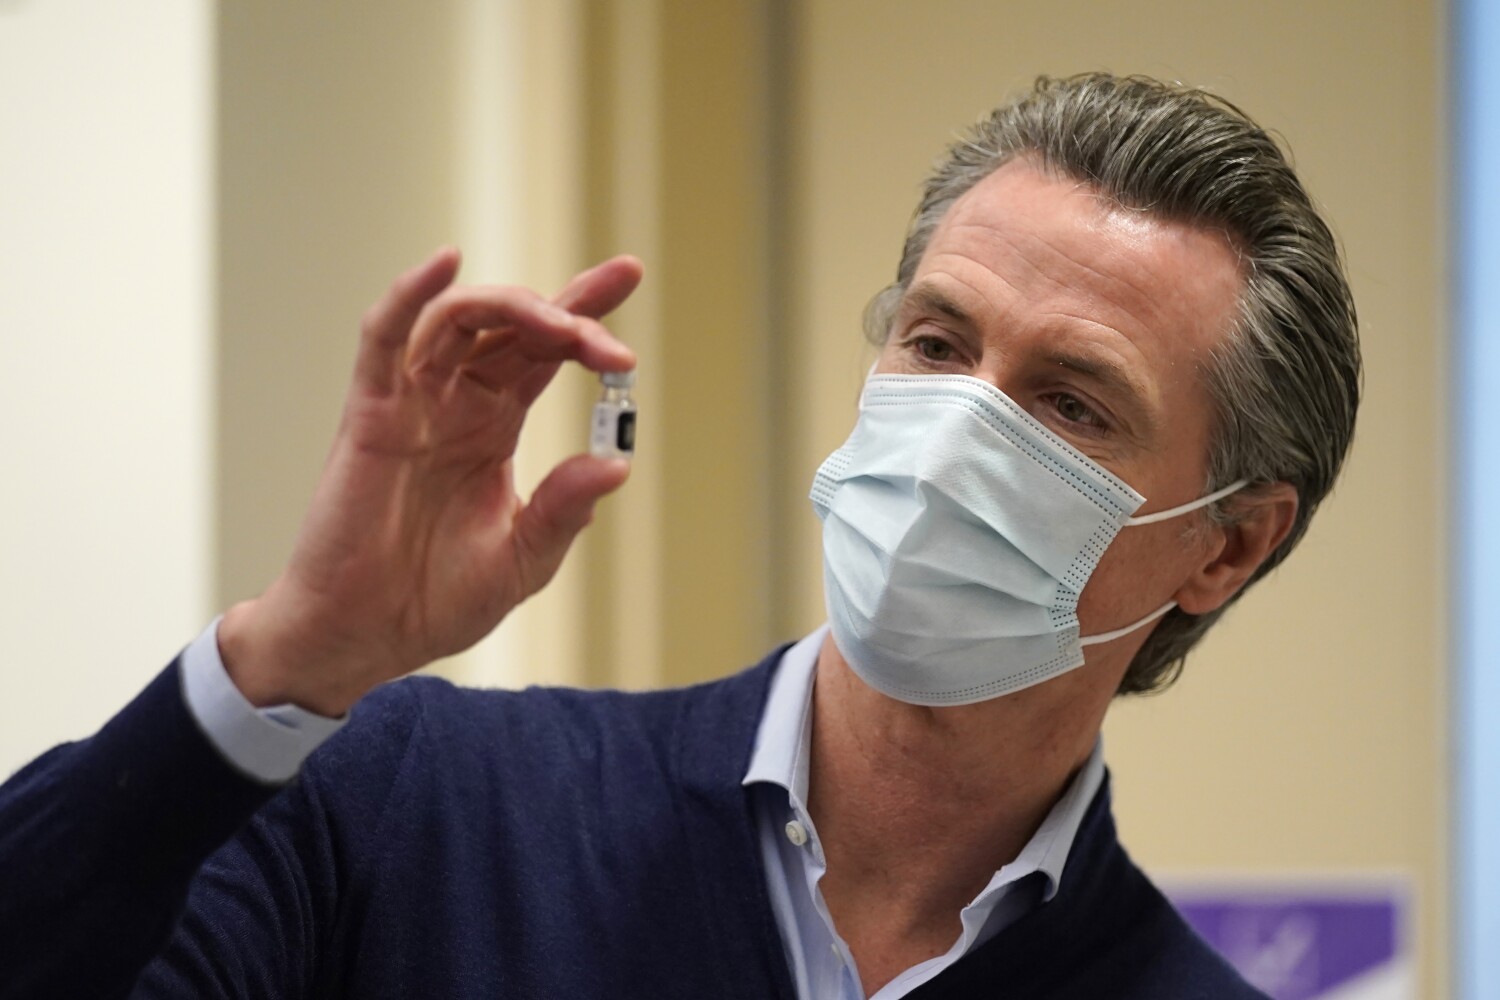 Poll: Newsom approval plummeting; a third of voters support recall amid COVID-19 criticism